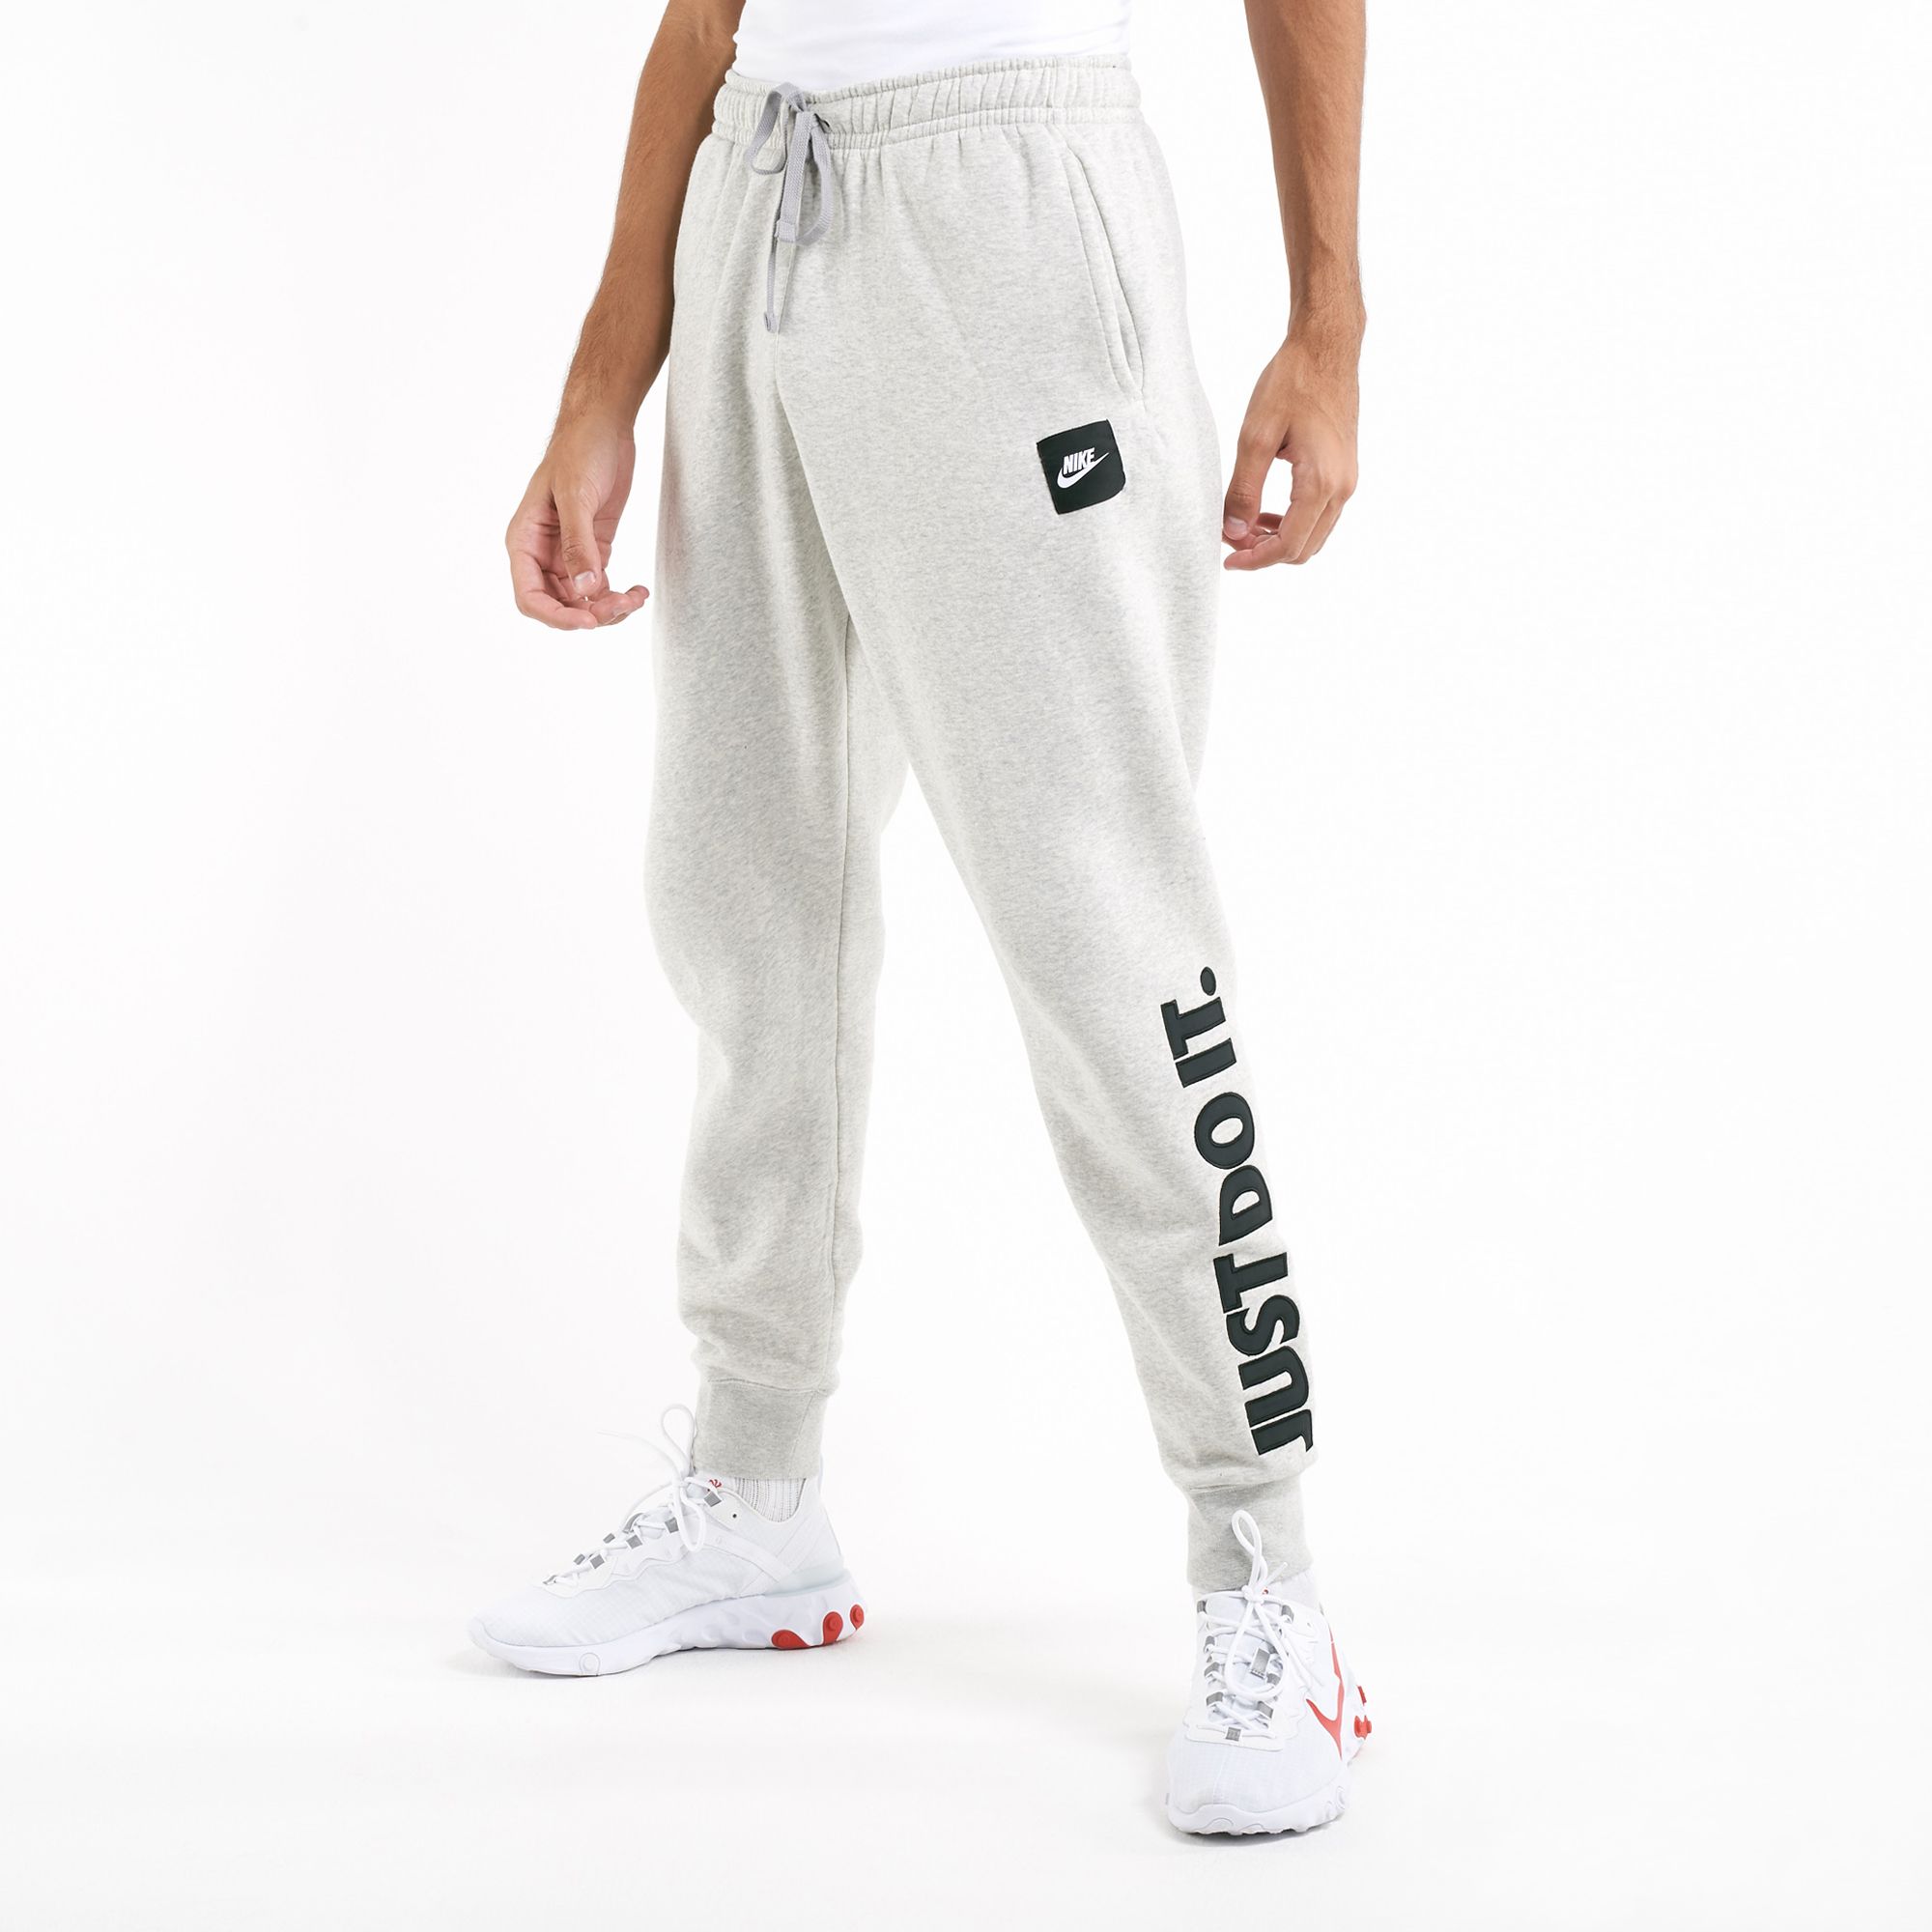 nike track pants just do it official 